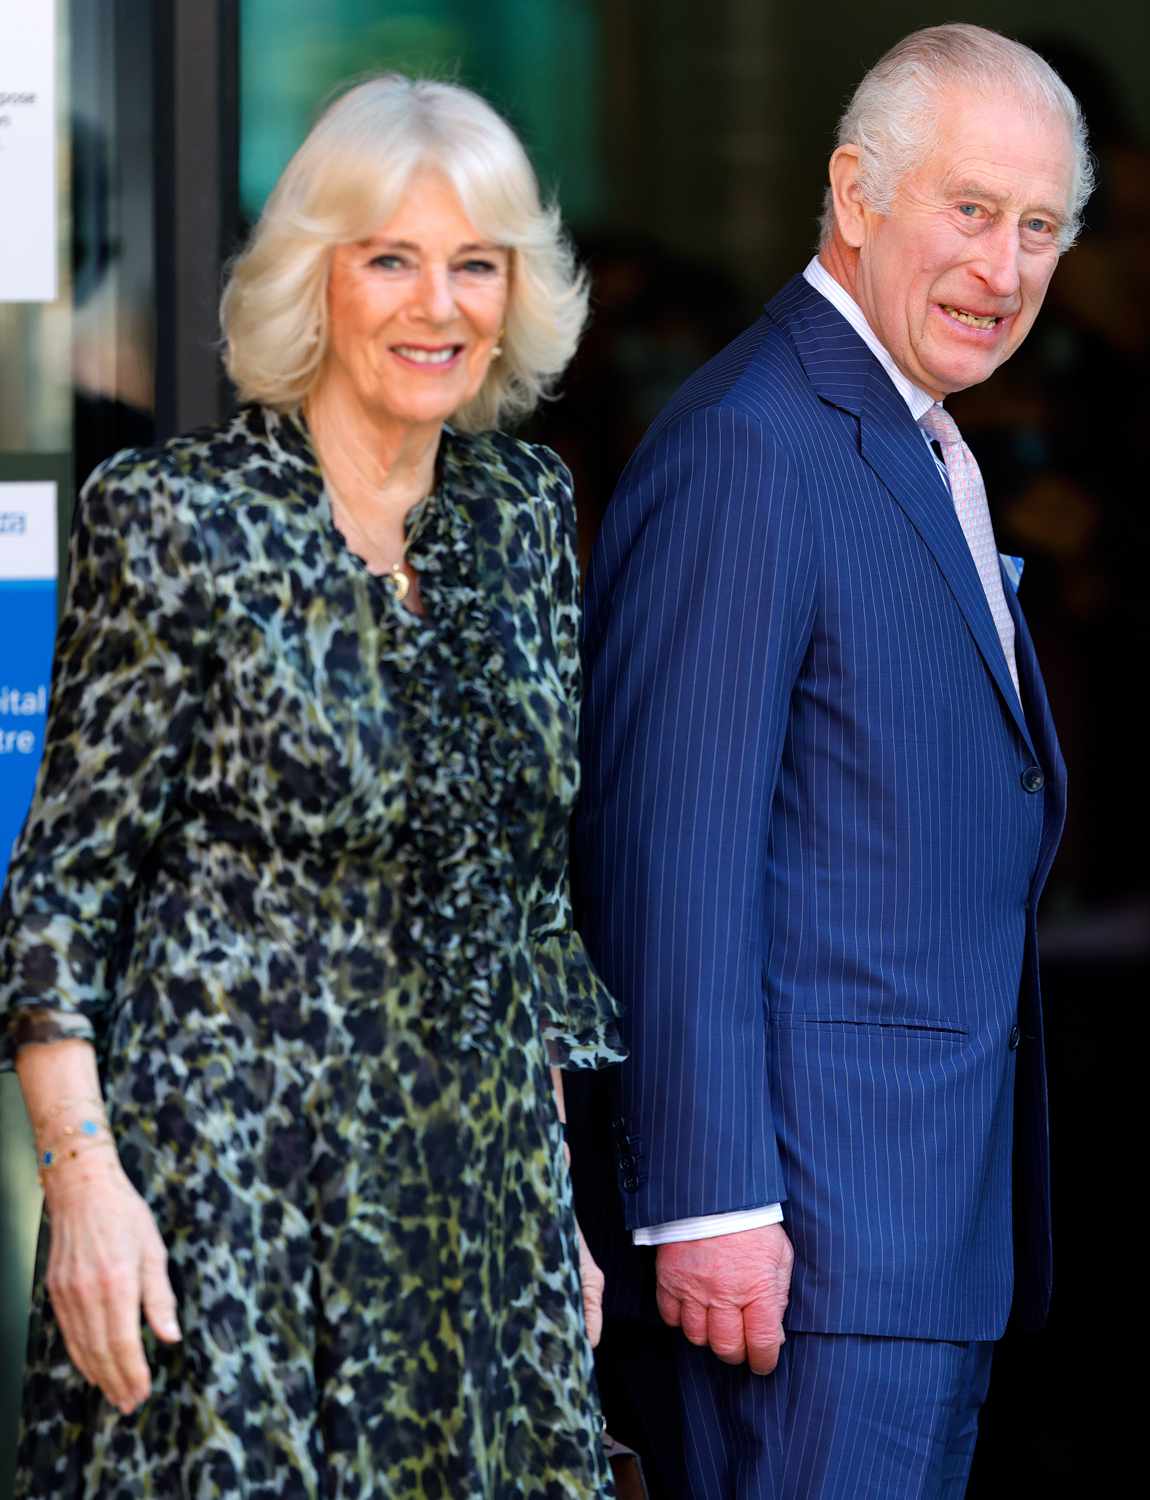 Queen Camilla and King Charles III visit the University College Hospital Macmillan Cancer Centre to raise awareness of the 